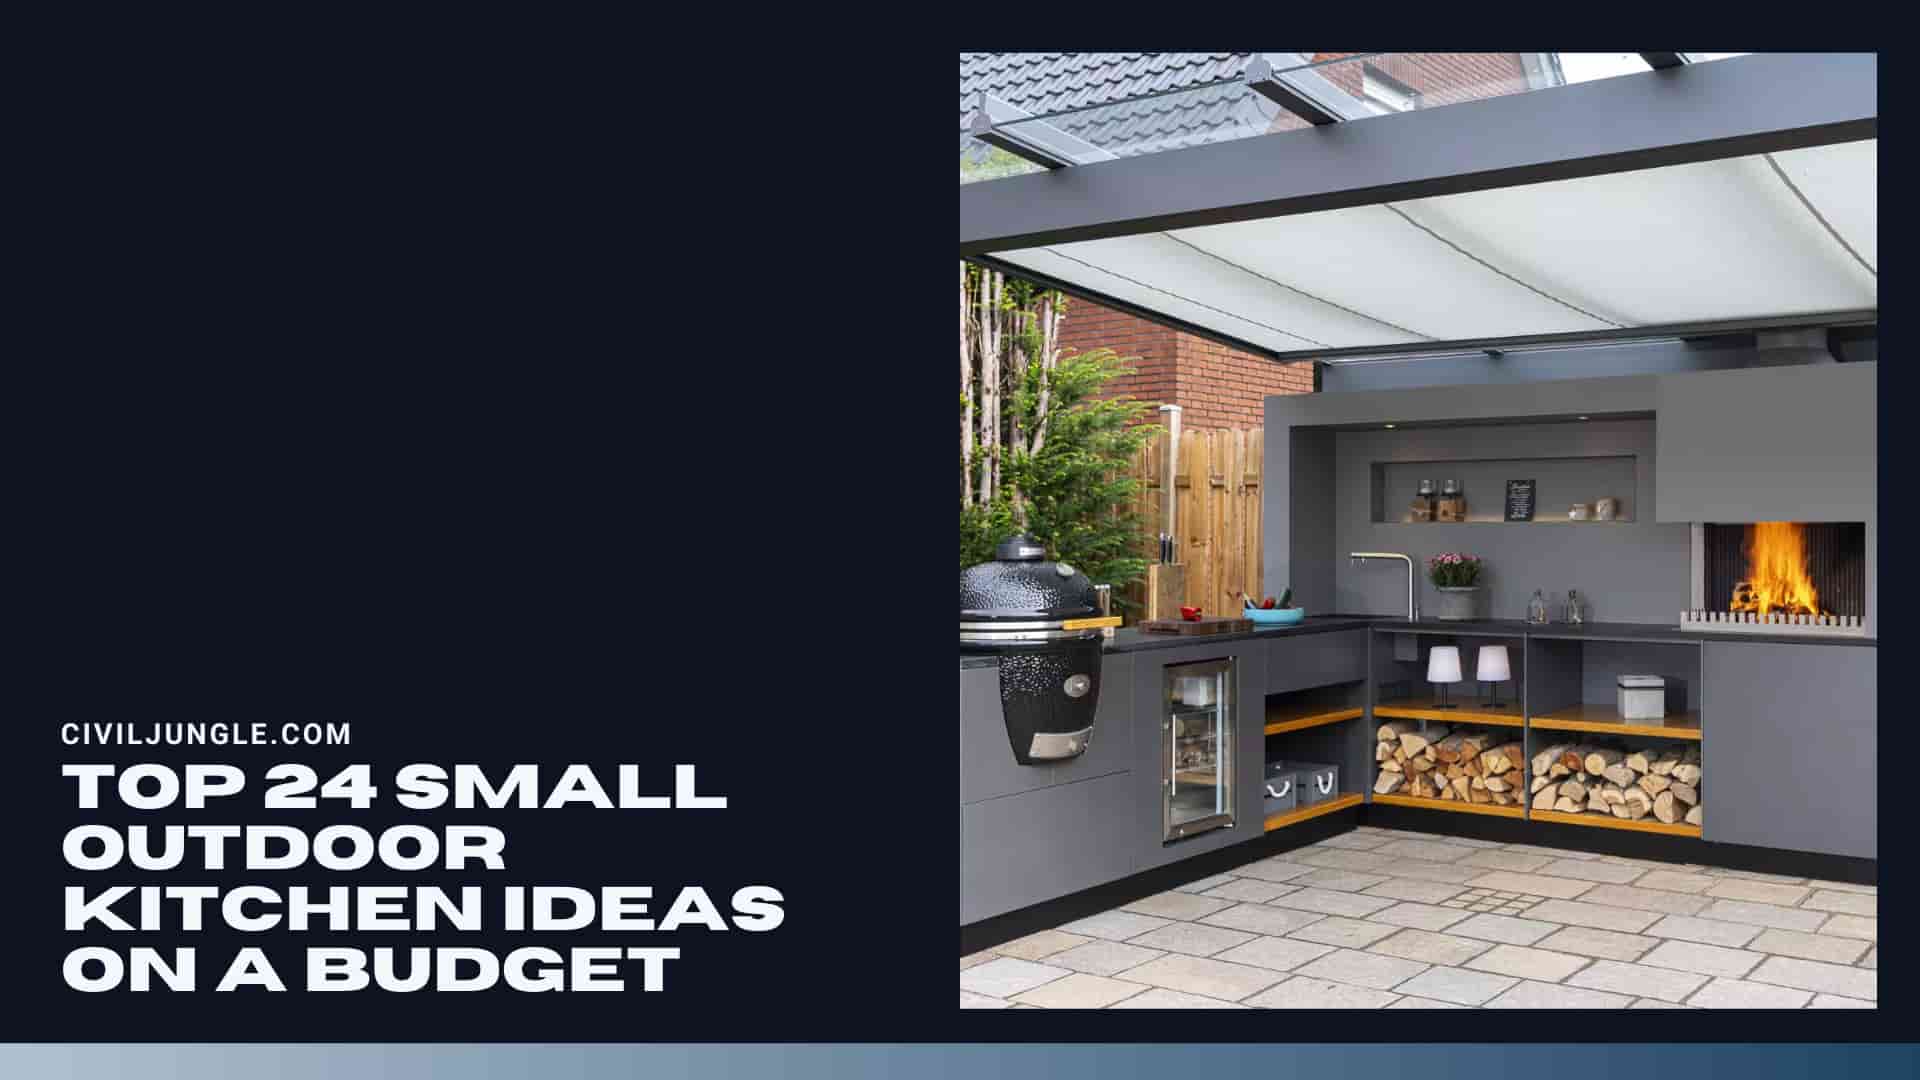 Top 24 Small Outdoor Kitchen Ideas on a Budget